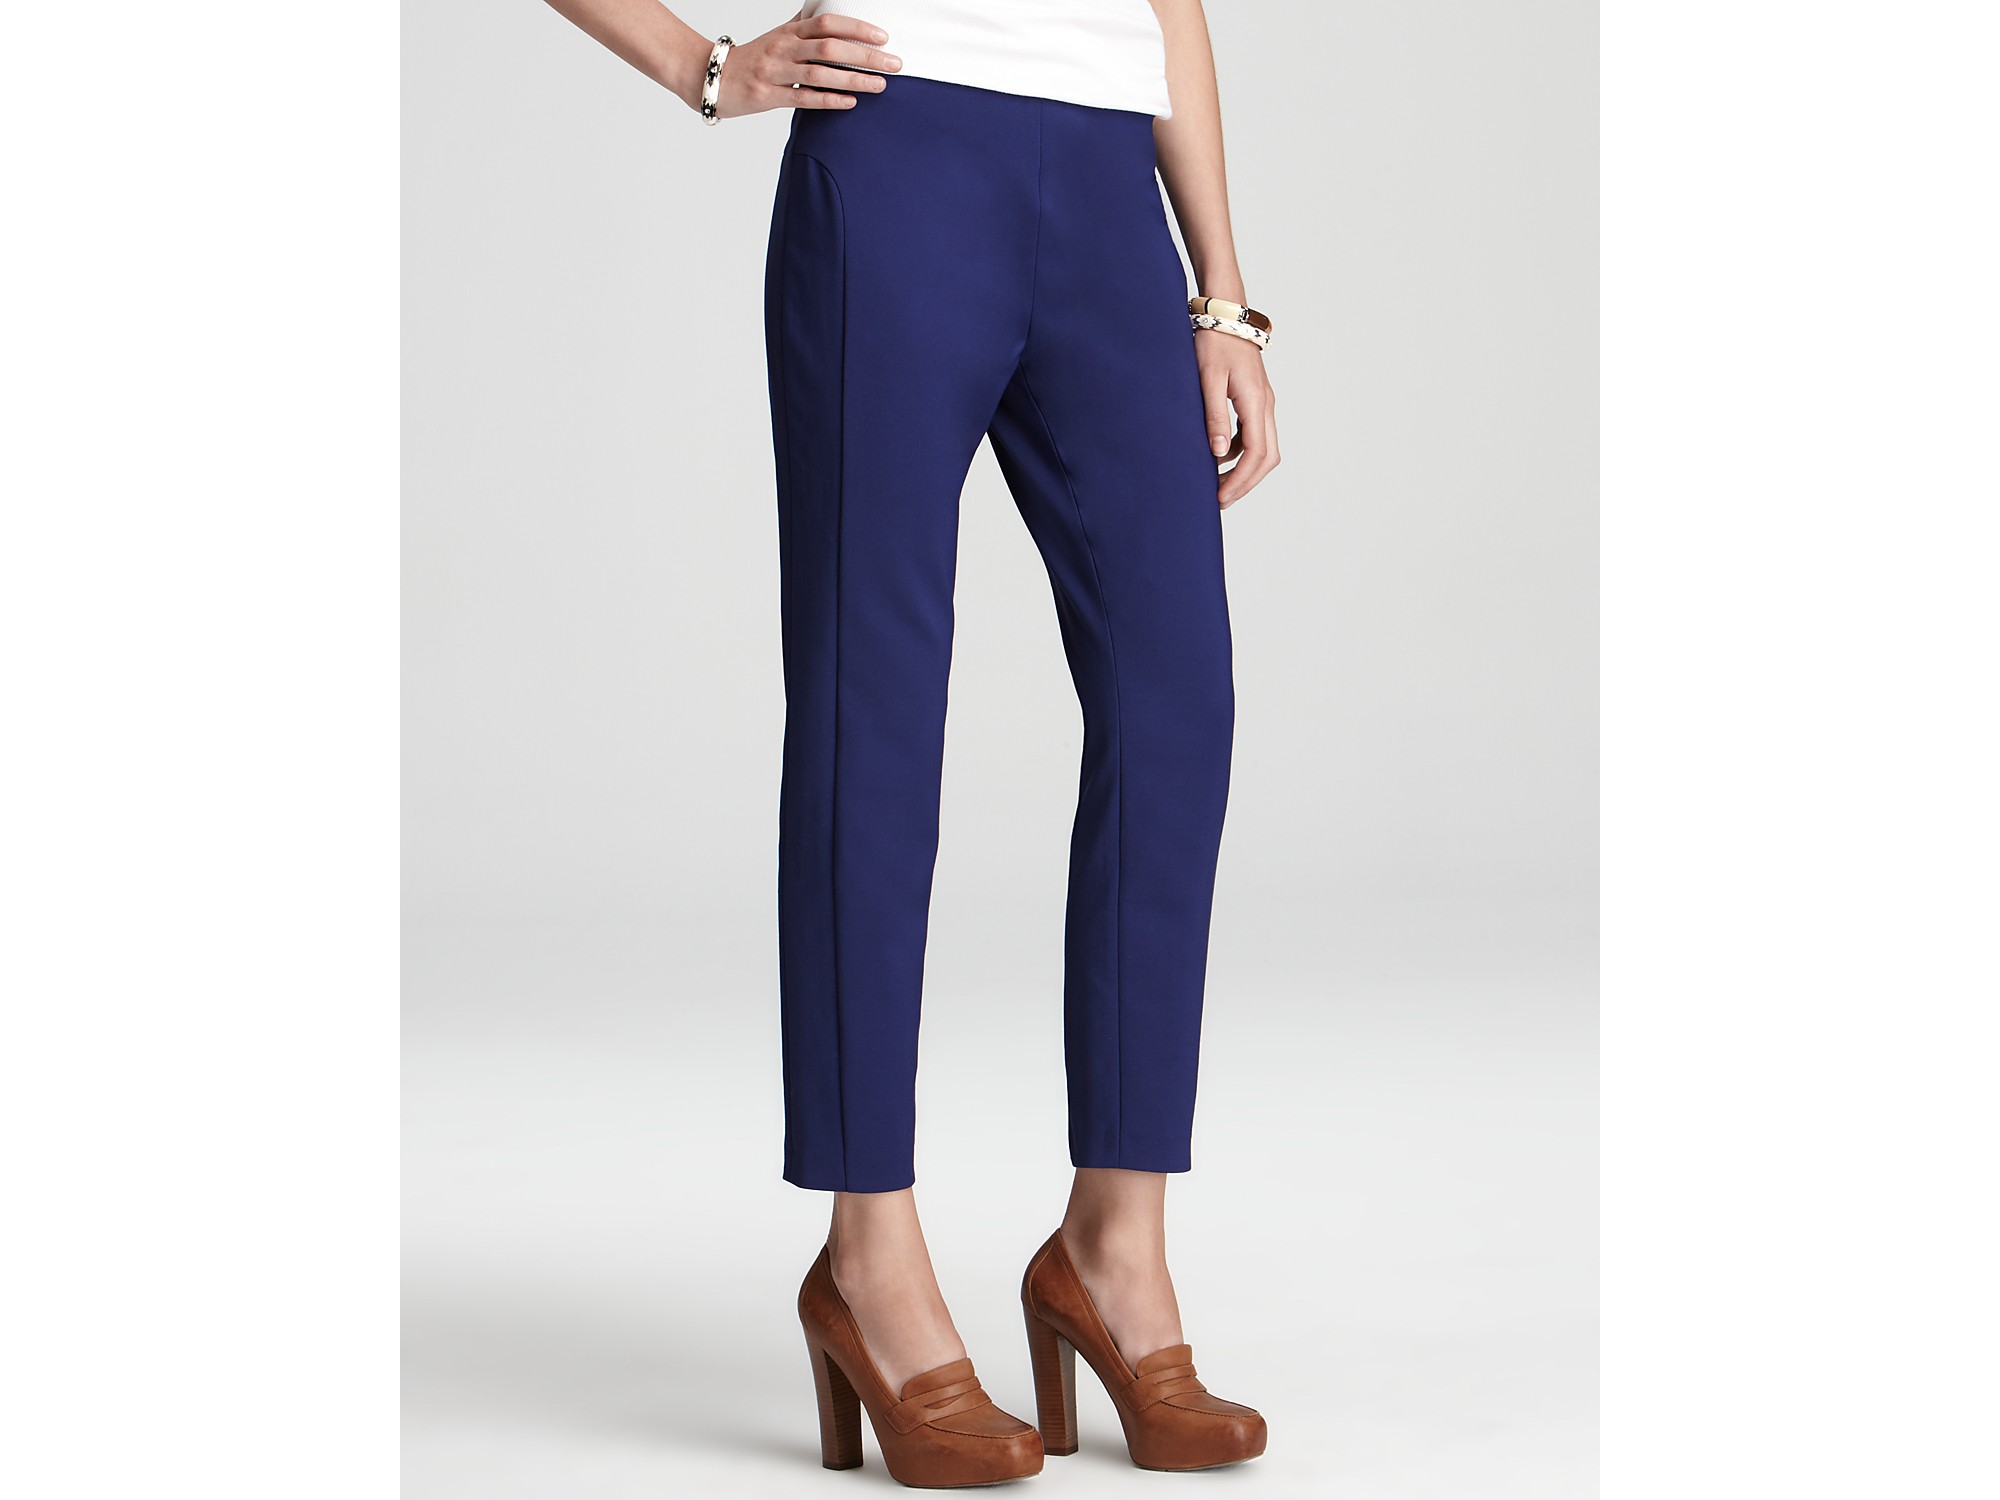 Lyst - French Connection Alma Stretch Cropped Pants in Blue